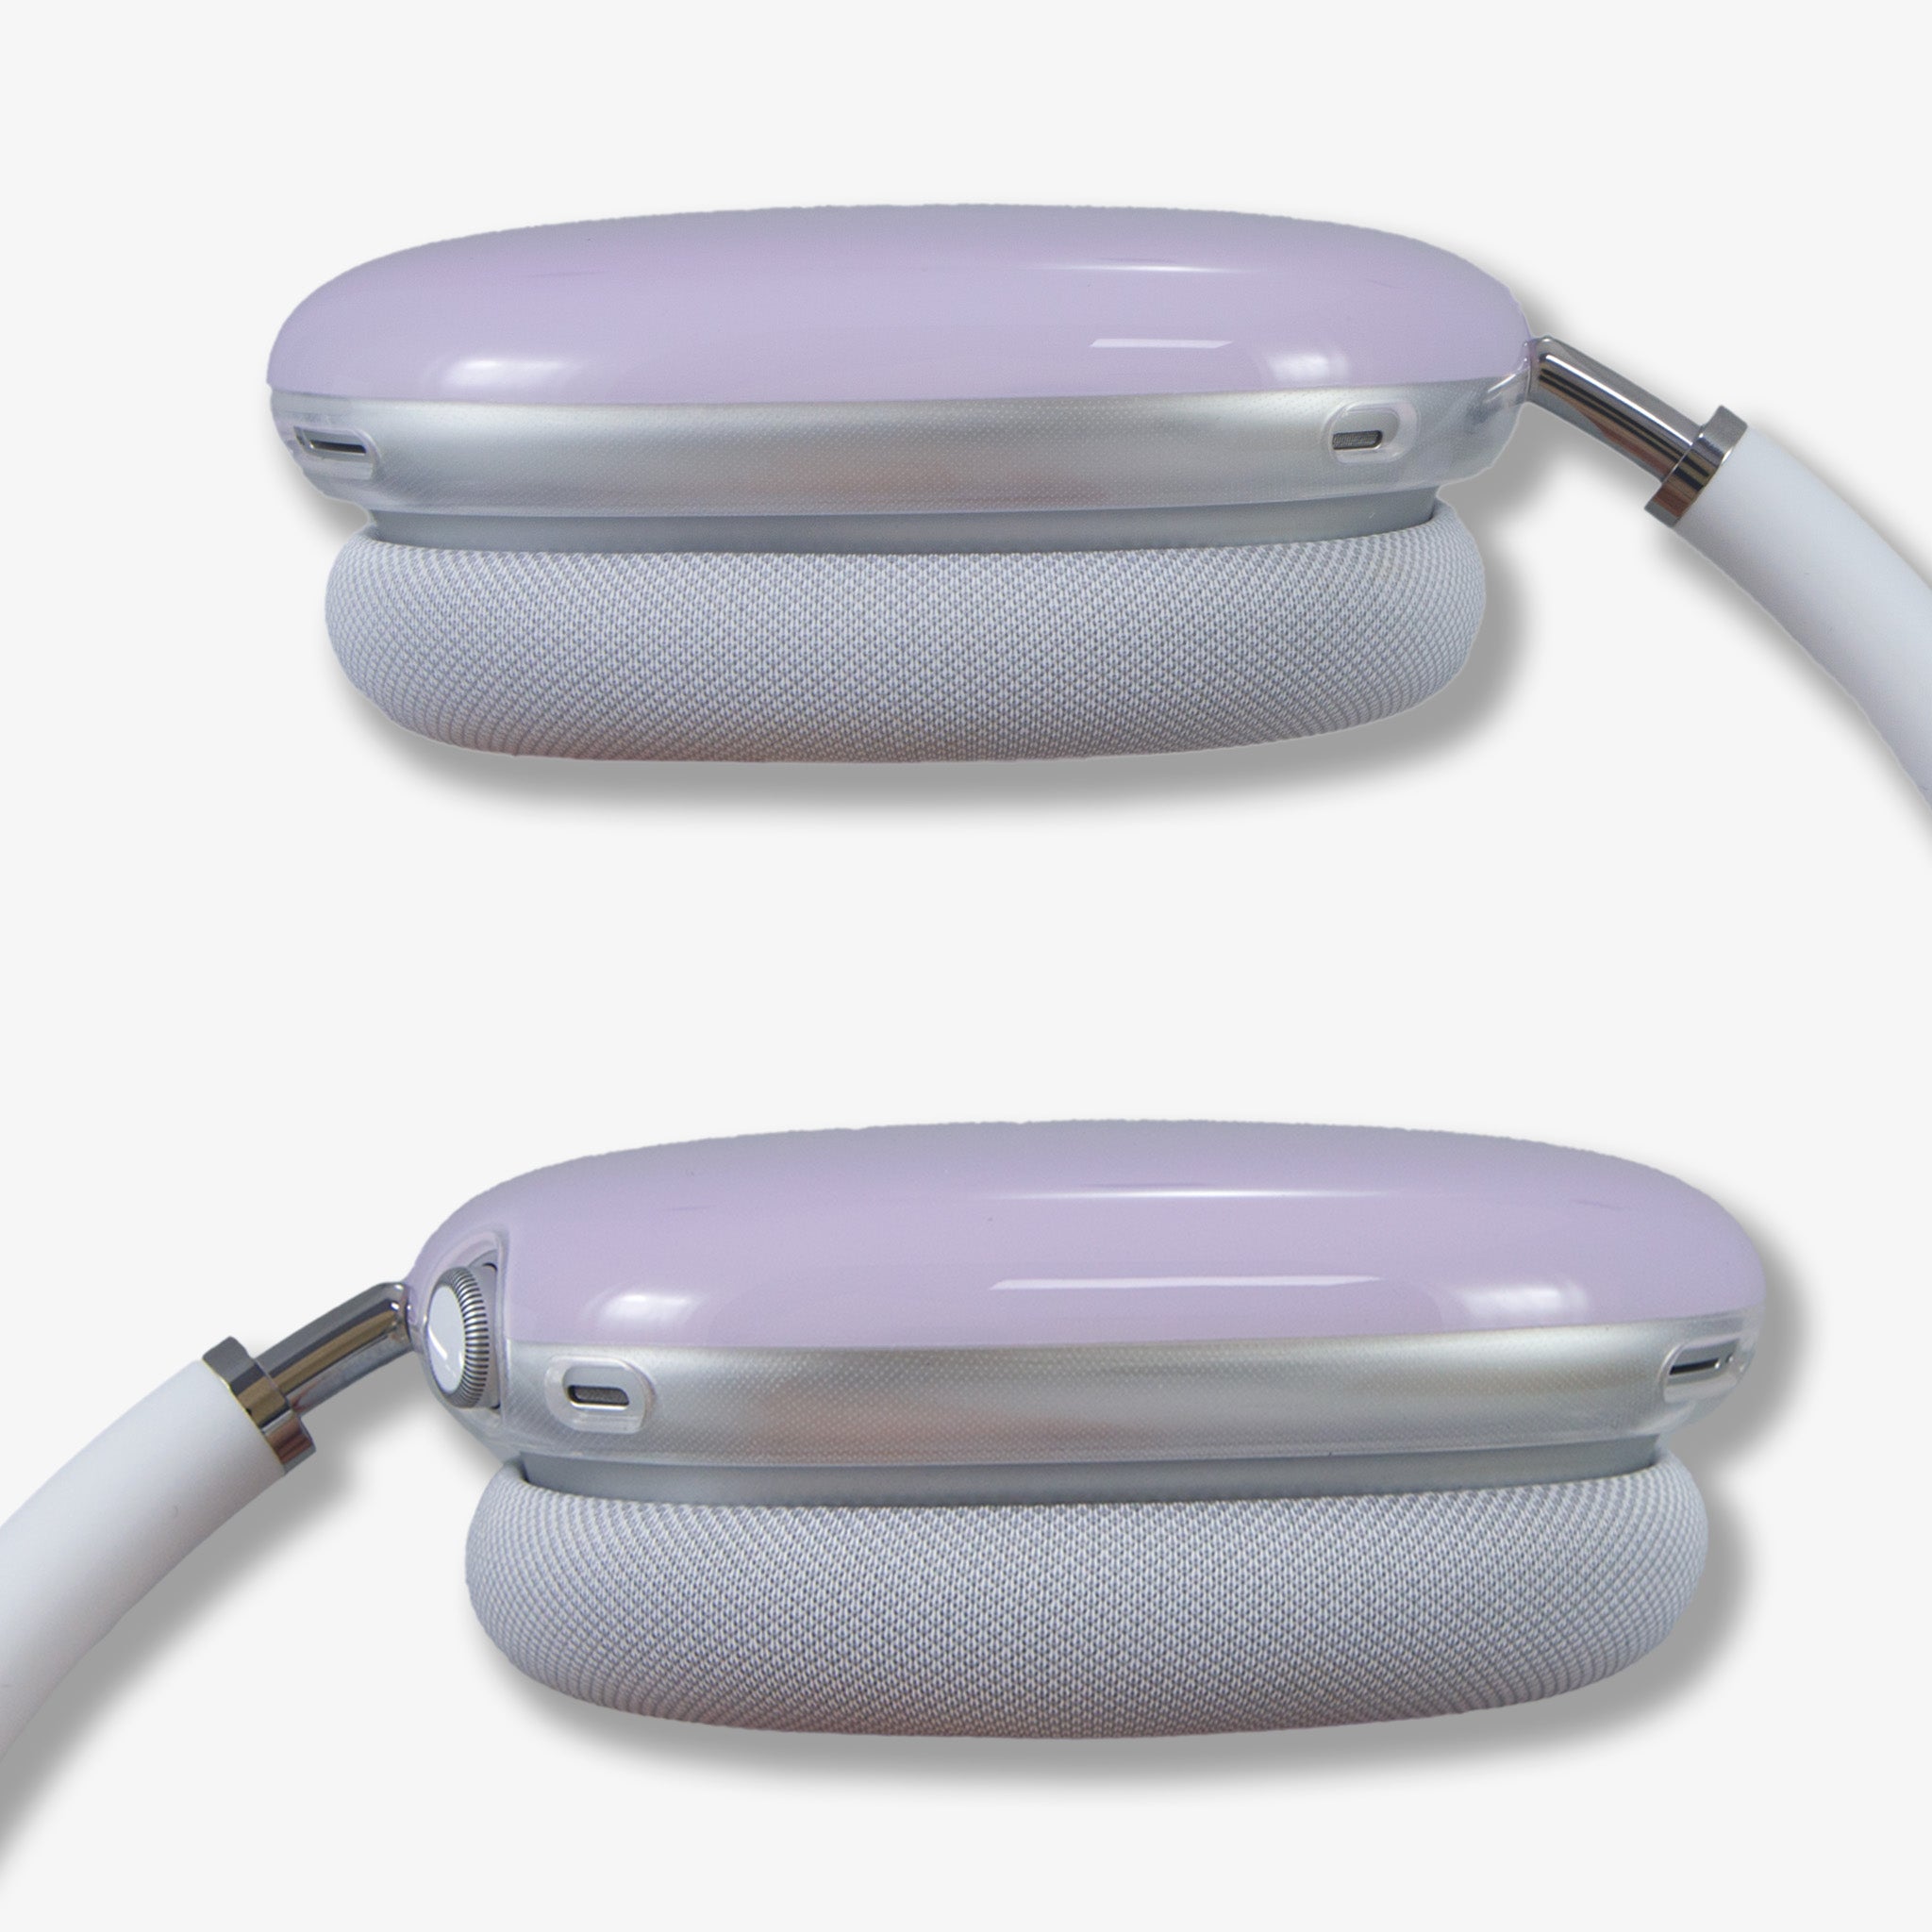 Jelly AirPods Max Cover - Lavender